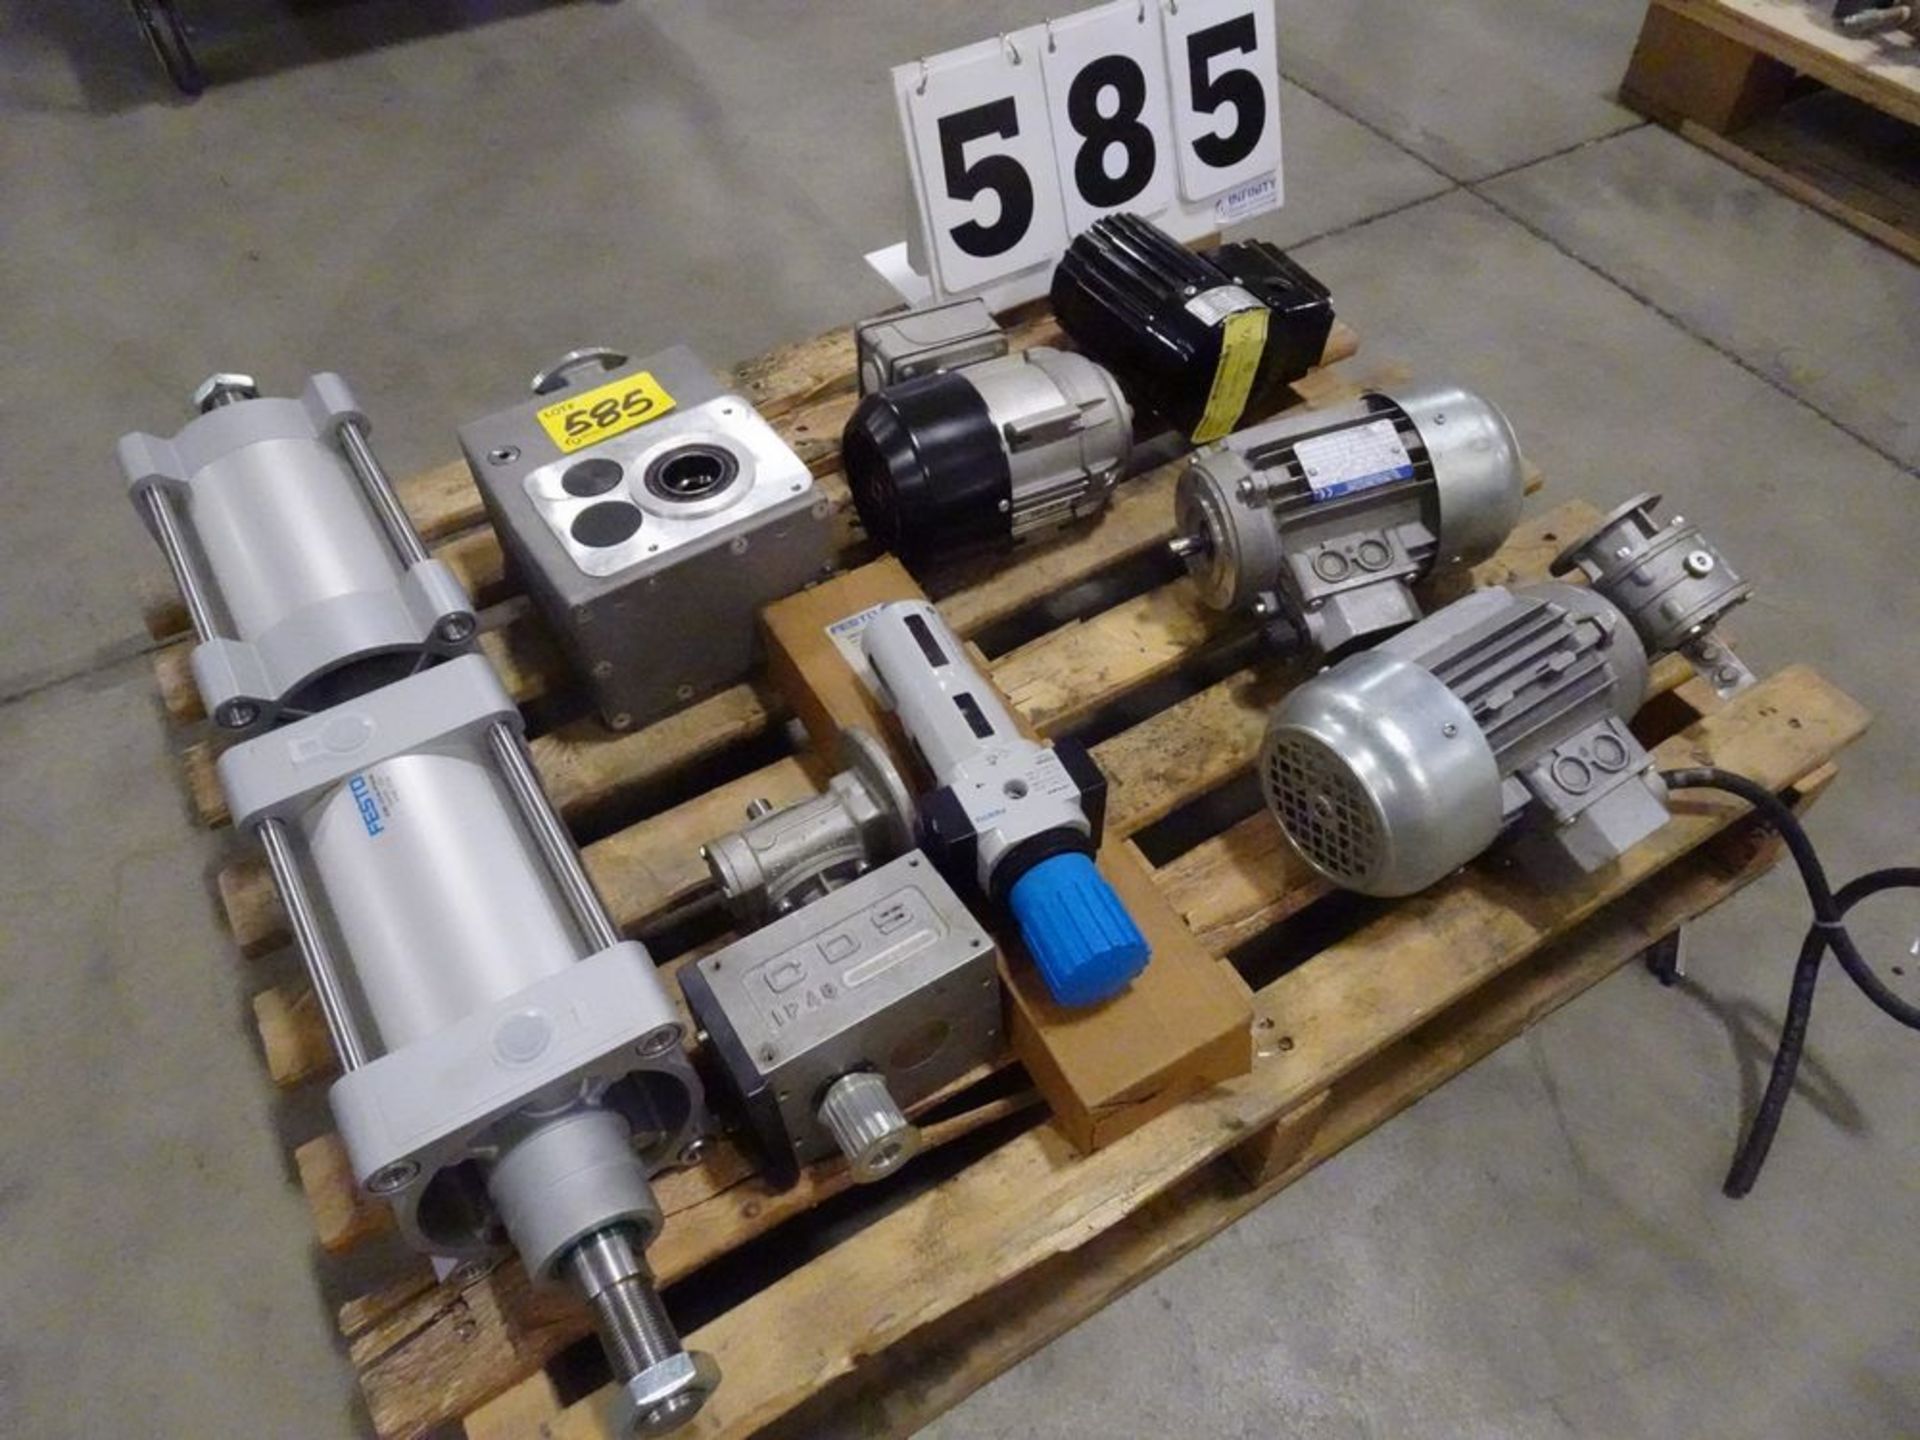 ASSORTED PRODUCT, FESTO VALVES, DRIVES, MOTORS, GEARBOXES, ETC.